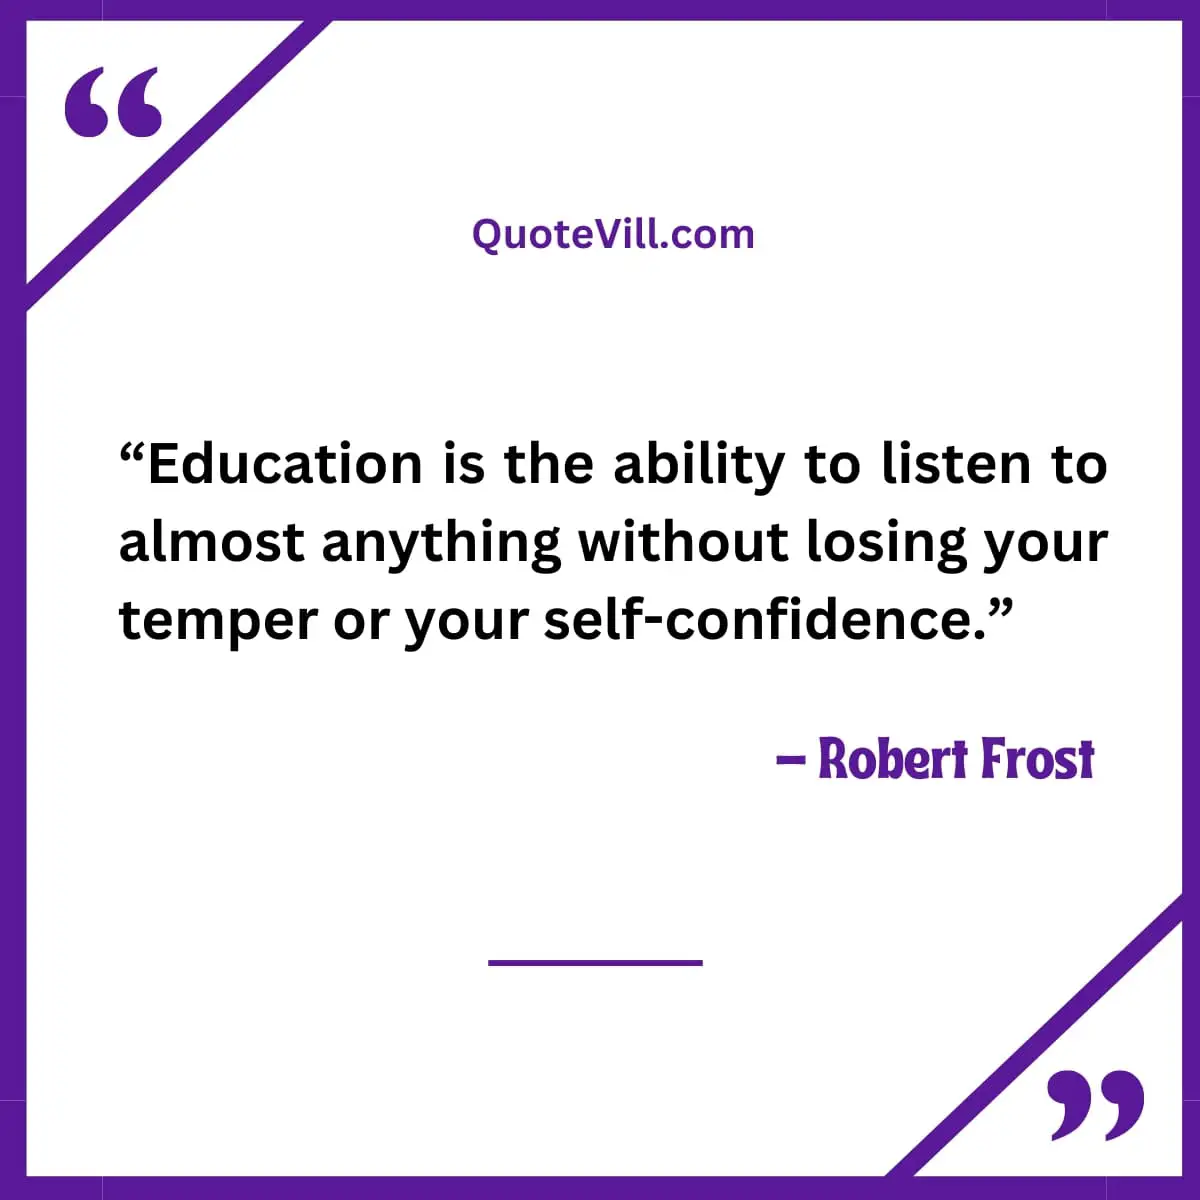 Quotes About Education And Success